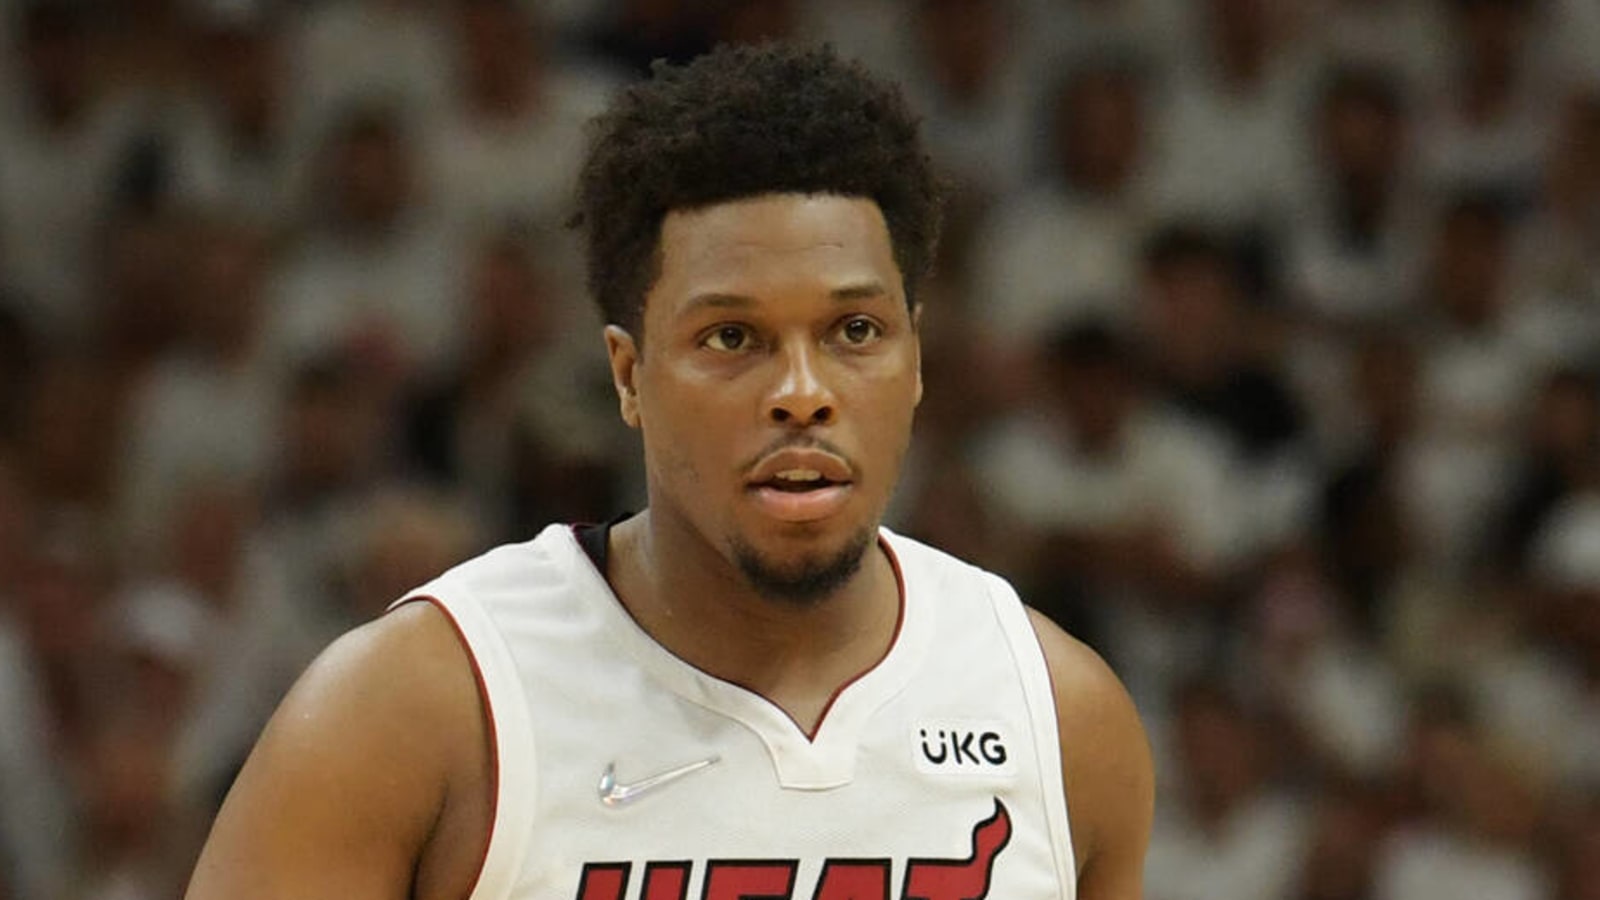 New photo shows a slimmed-down Kyle Lowry